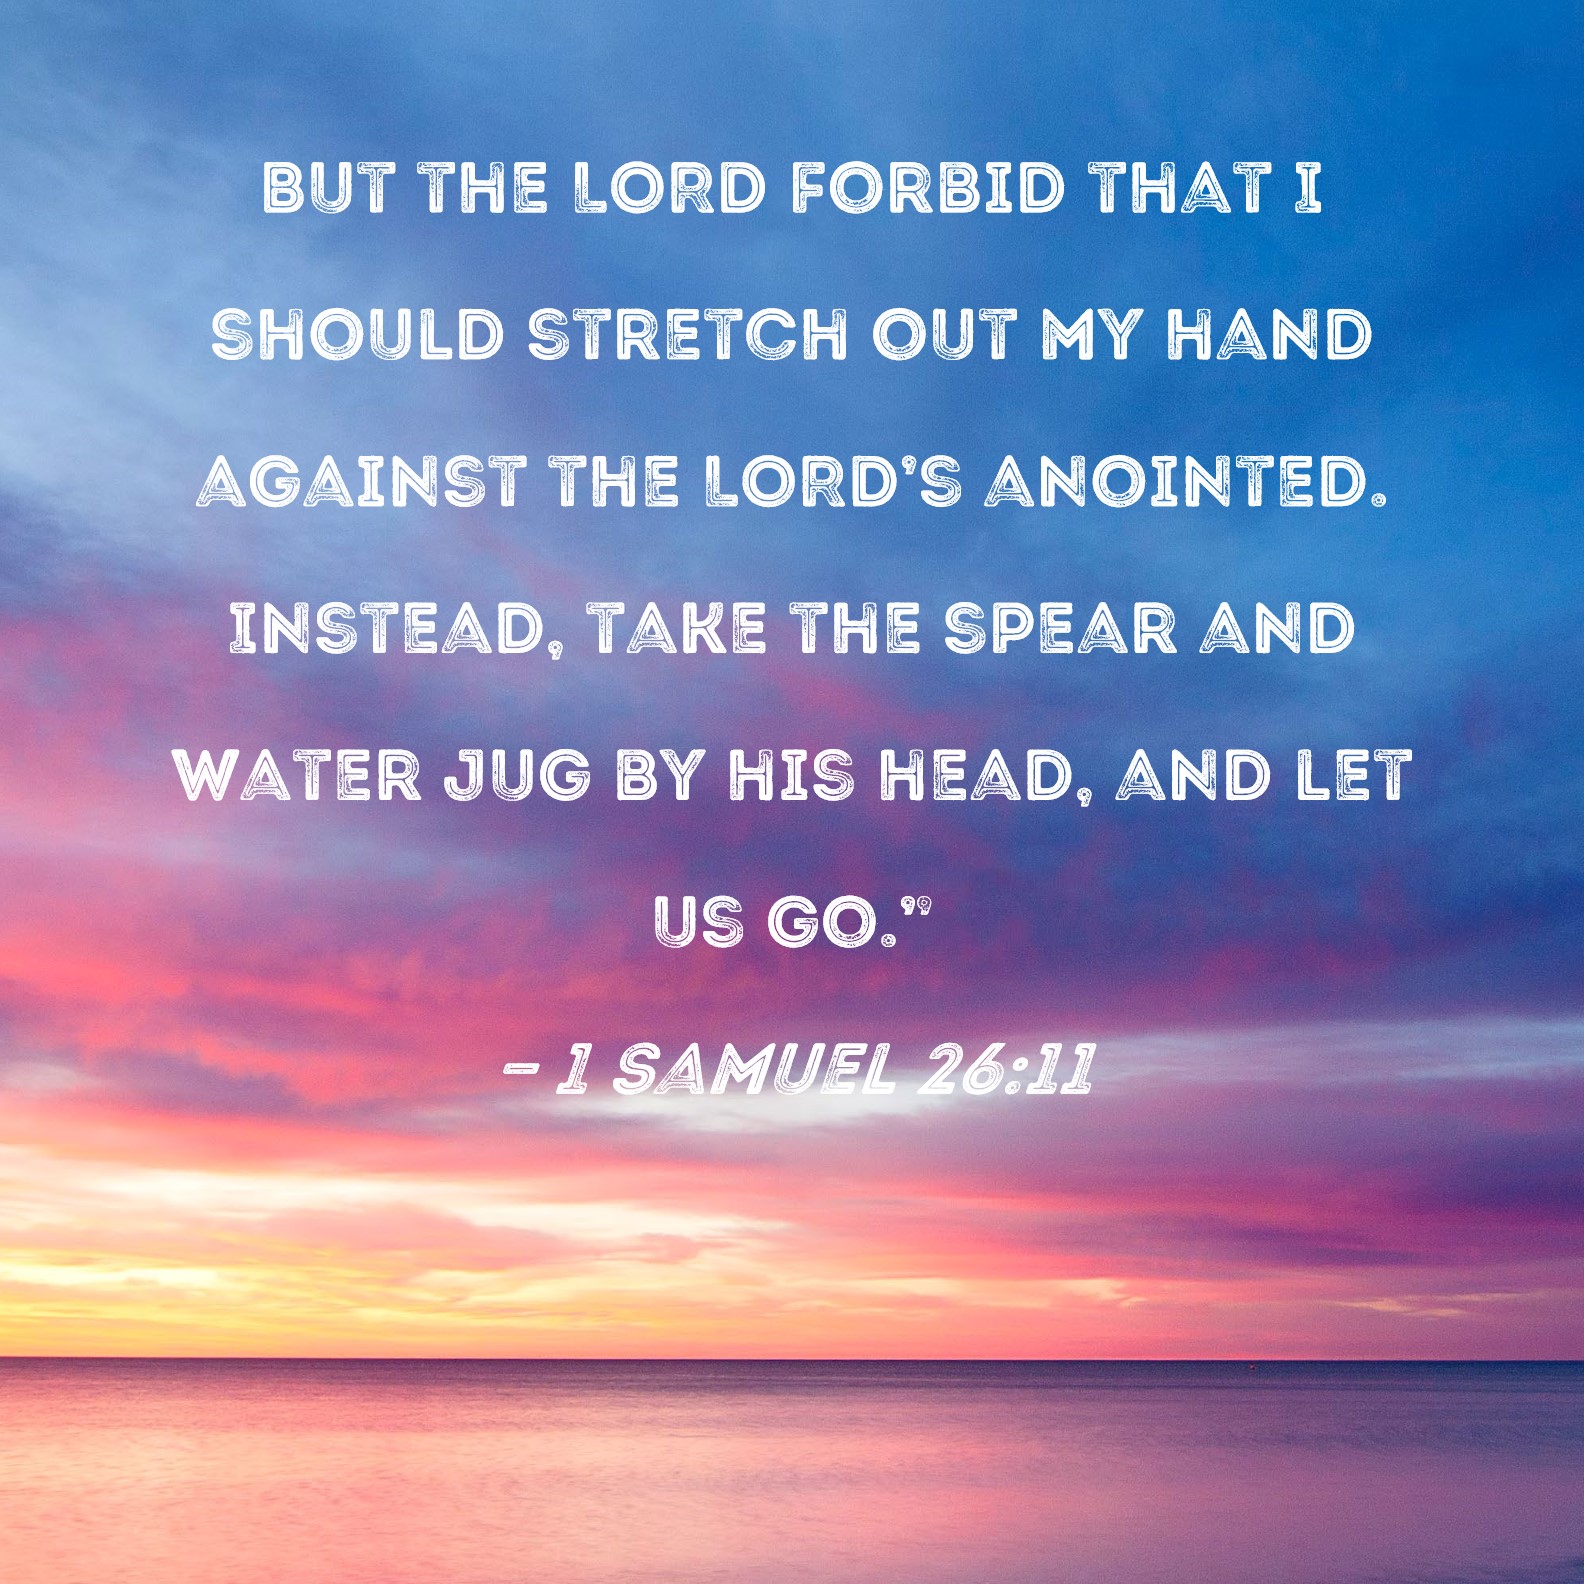 1 Samuel 26:11 But the LORD forbid that I should stretch out my hand ...